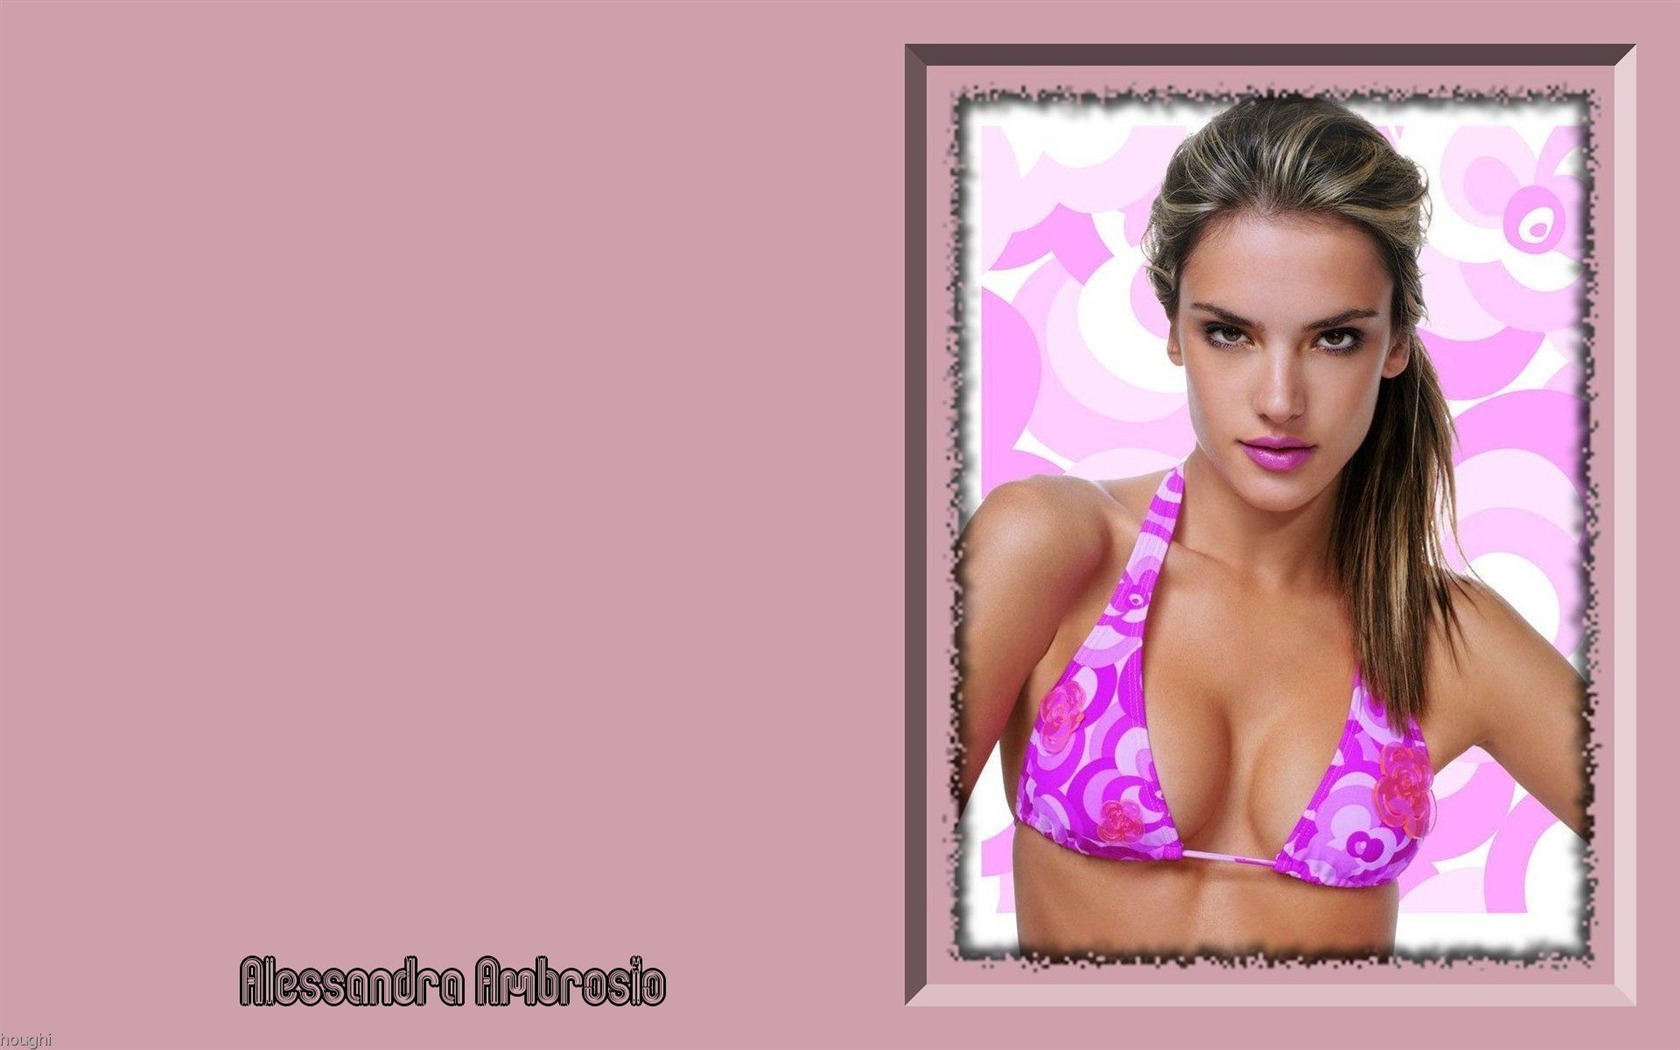 Alessandra Ambrosio #090 - 1680x1050 Wallpapers Pictures Photos Images